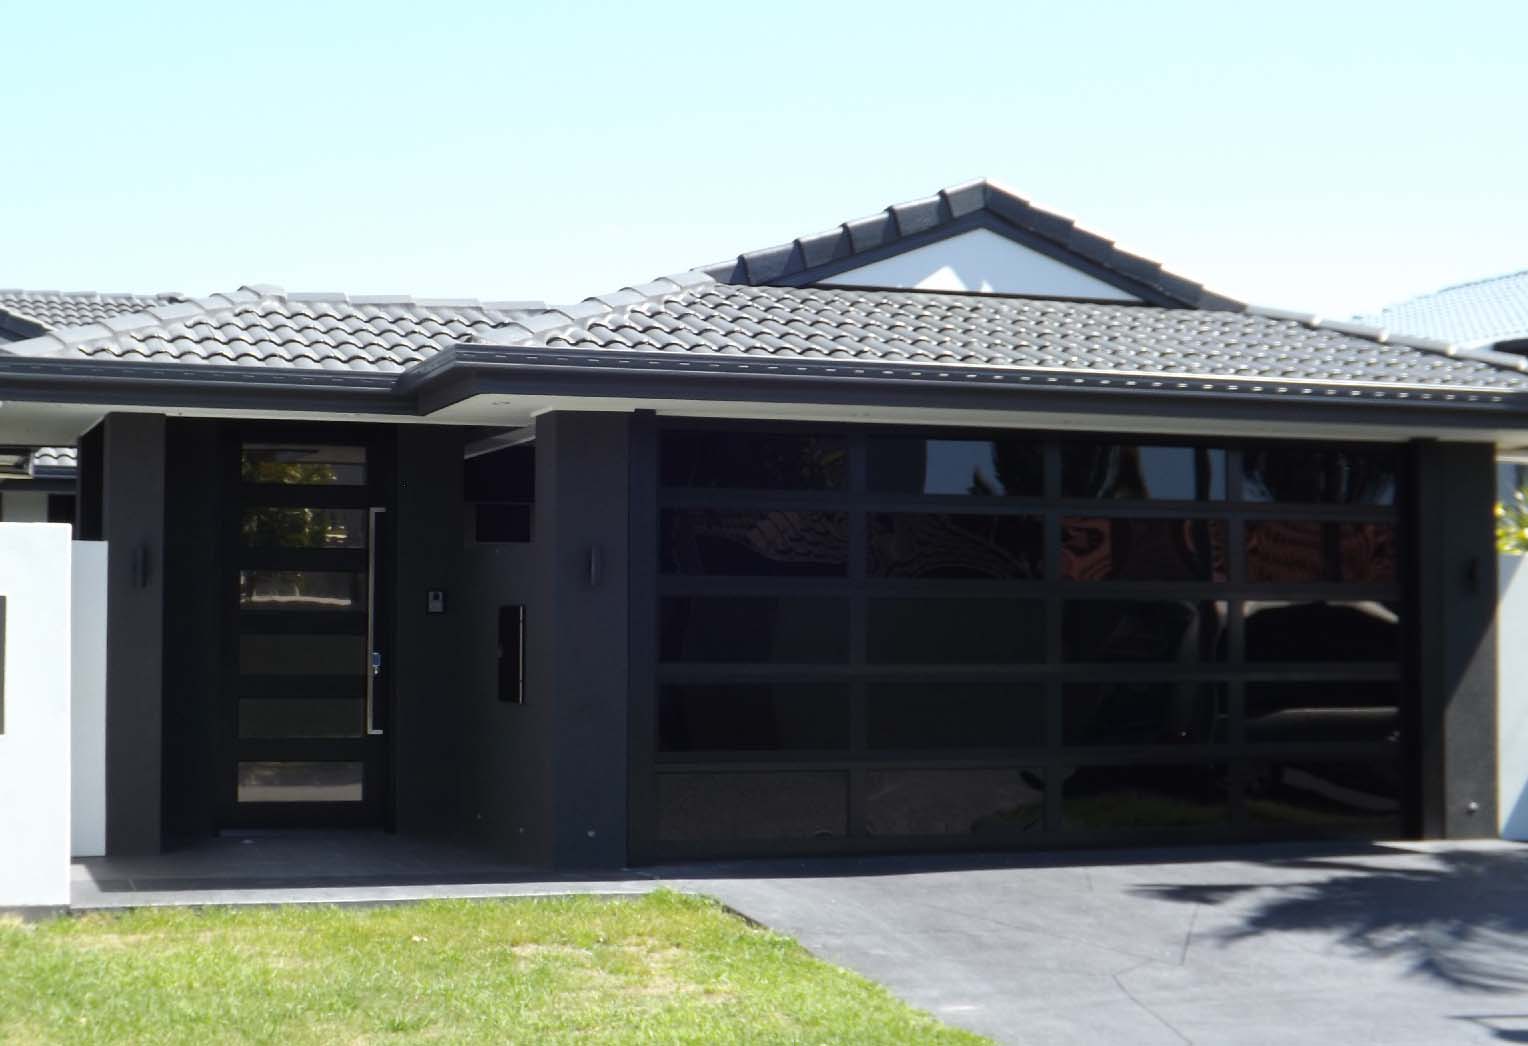 Lovely Custom Black Glass Garage With Black Aluminium Frame Garage Door Ideas Best Rooftop For Home Architecture Gray Wall Best Floor And Grass For Concept Design  Ideas